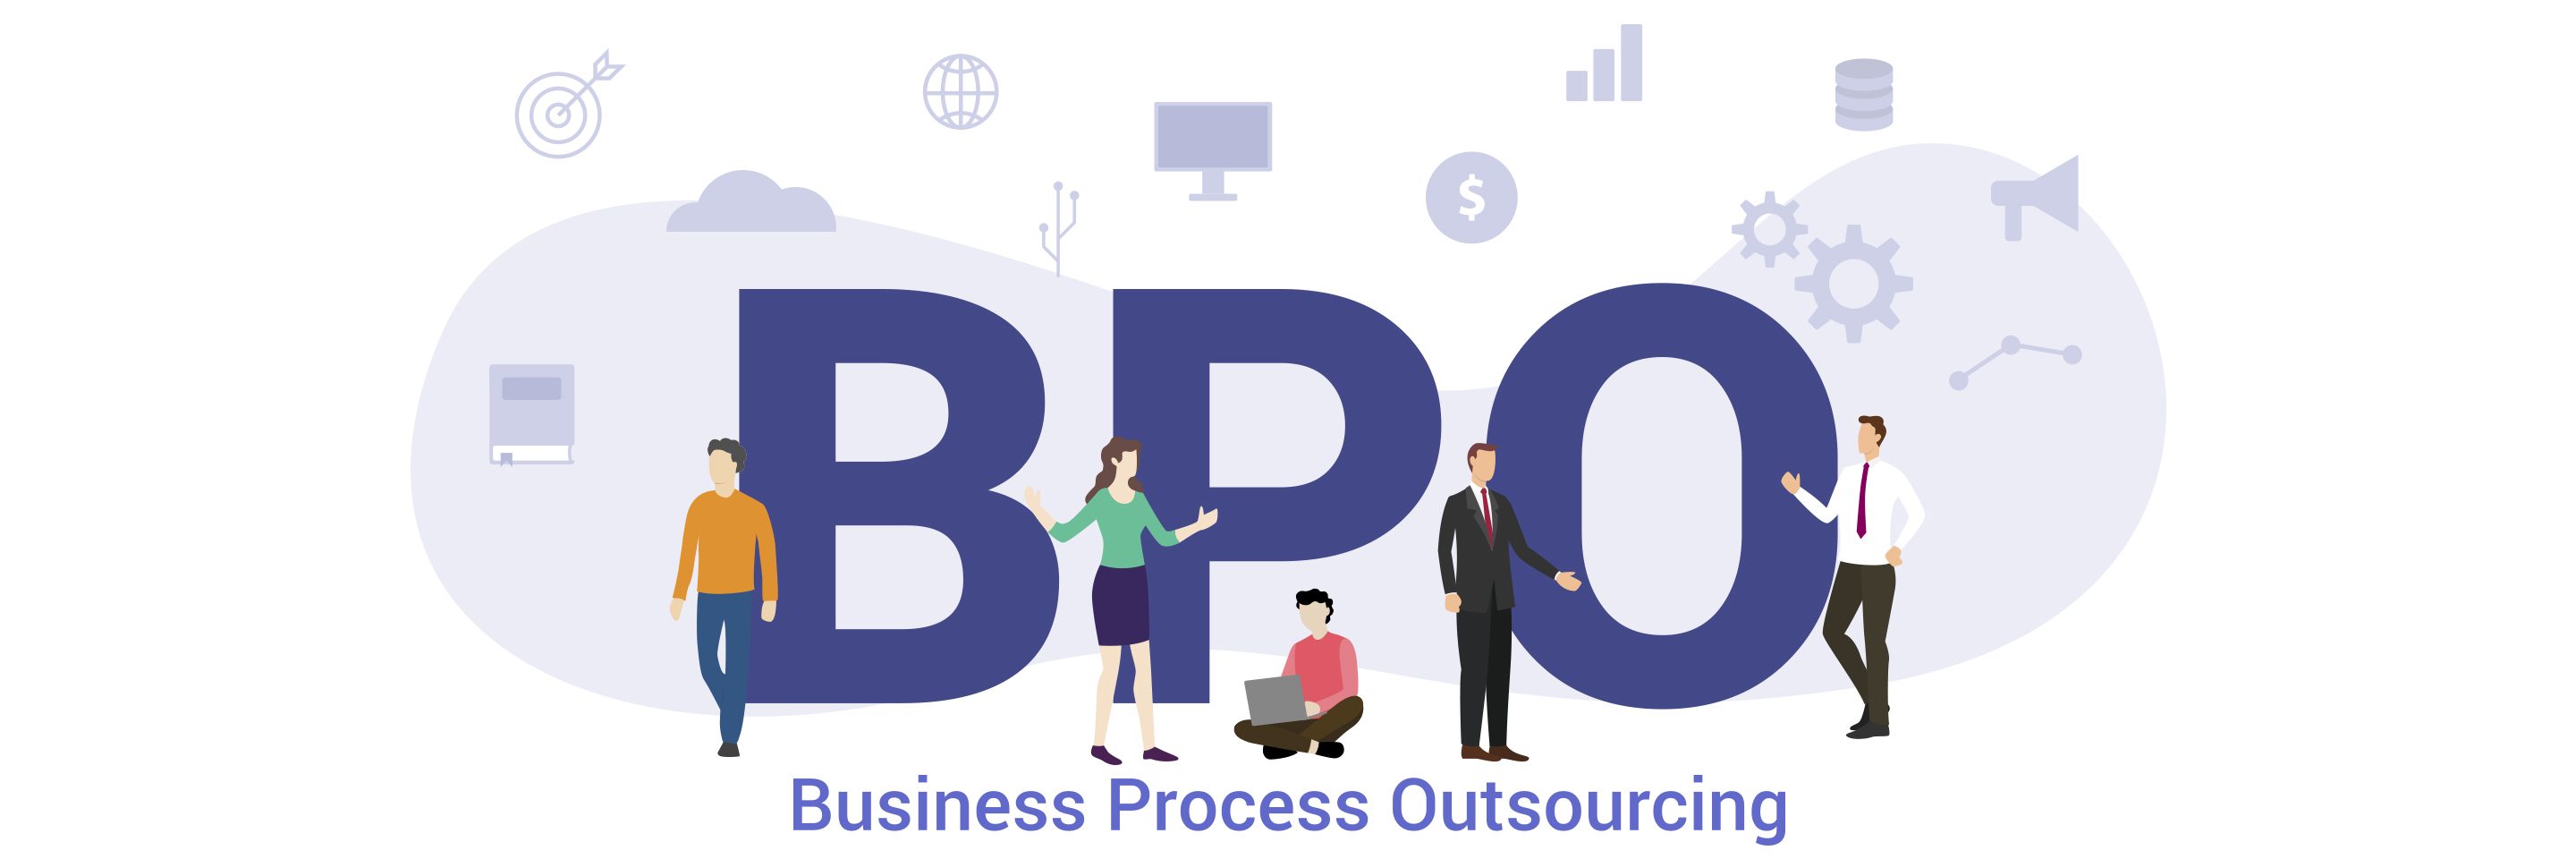 Business Process Outsourcing	